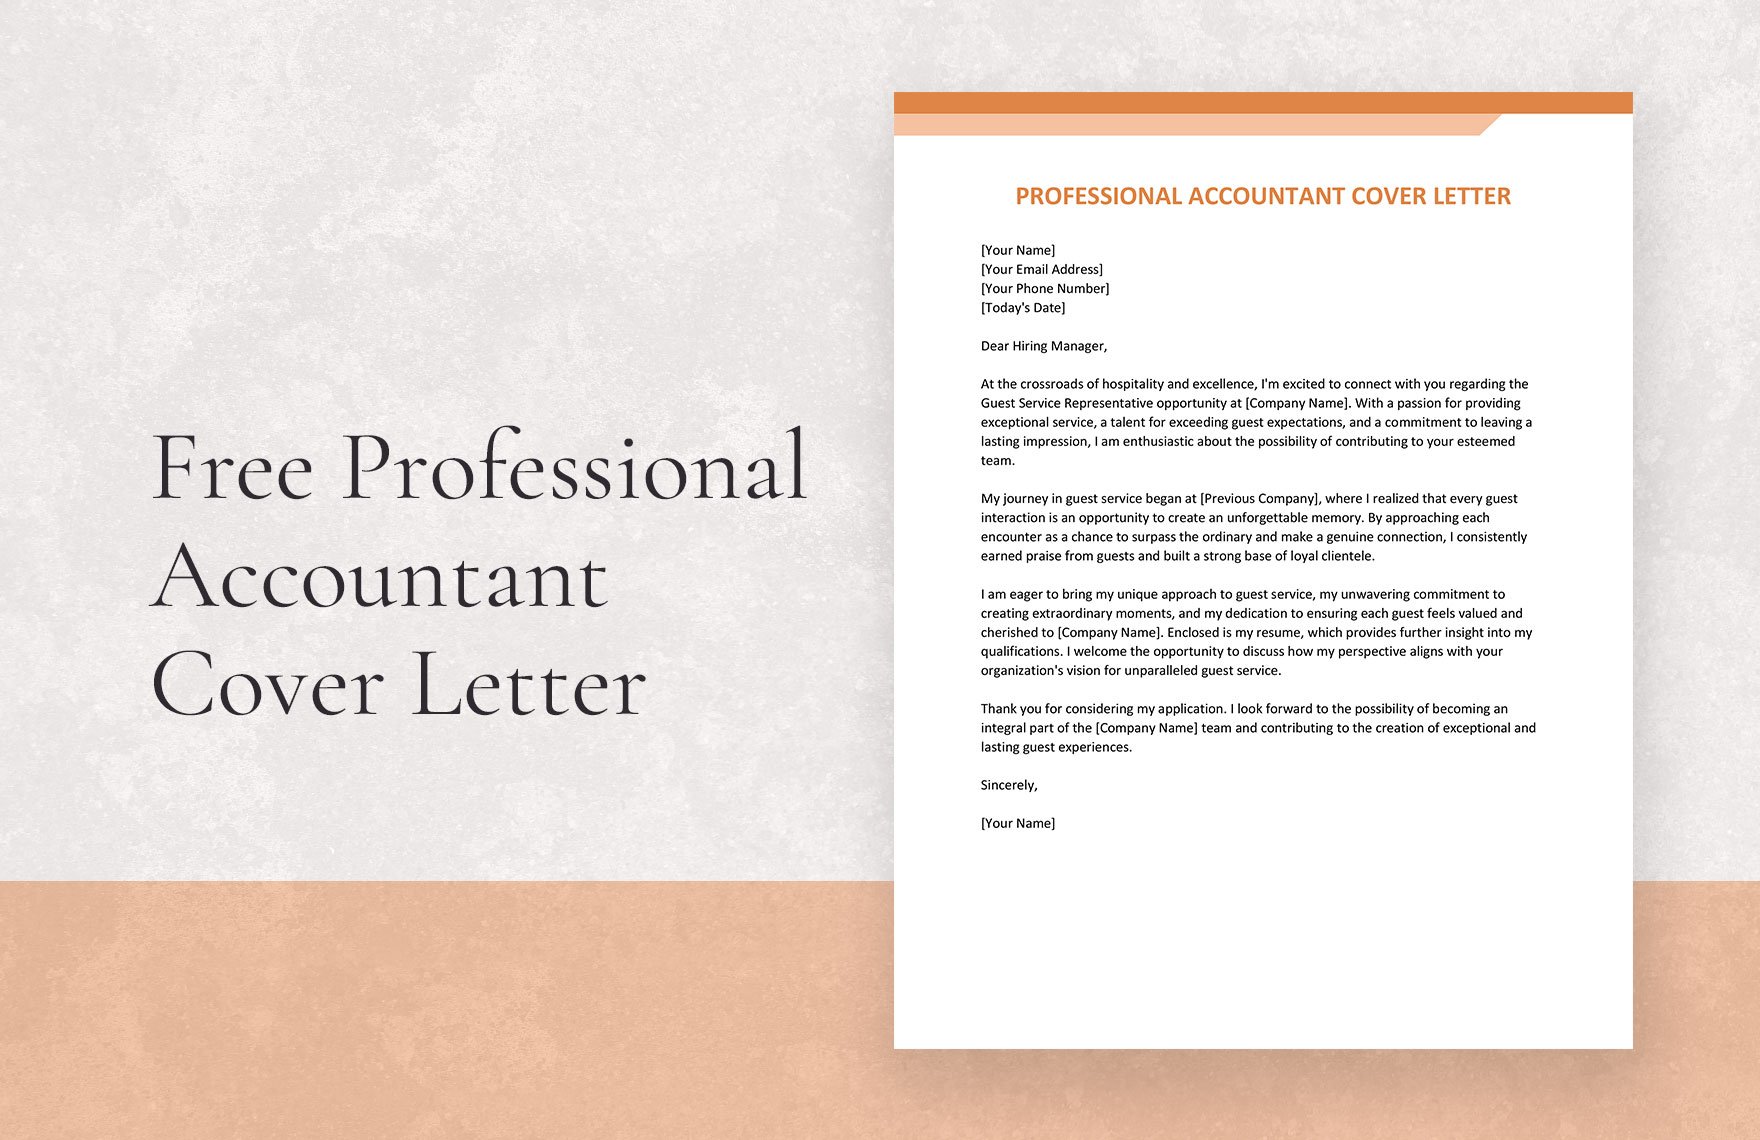 Professional Accountant Cover Letter in Word, Google Docs